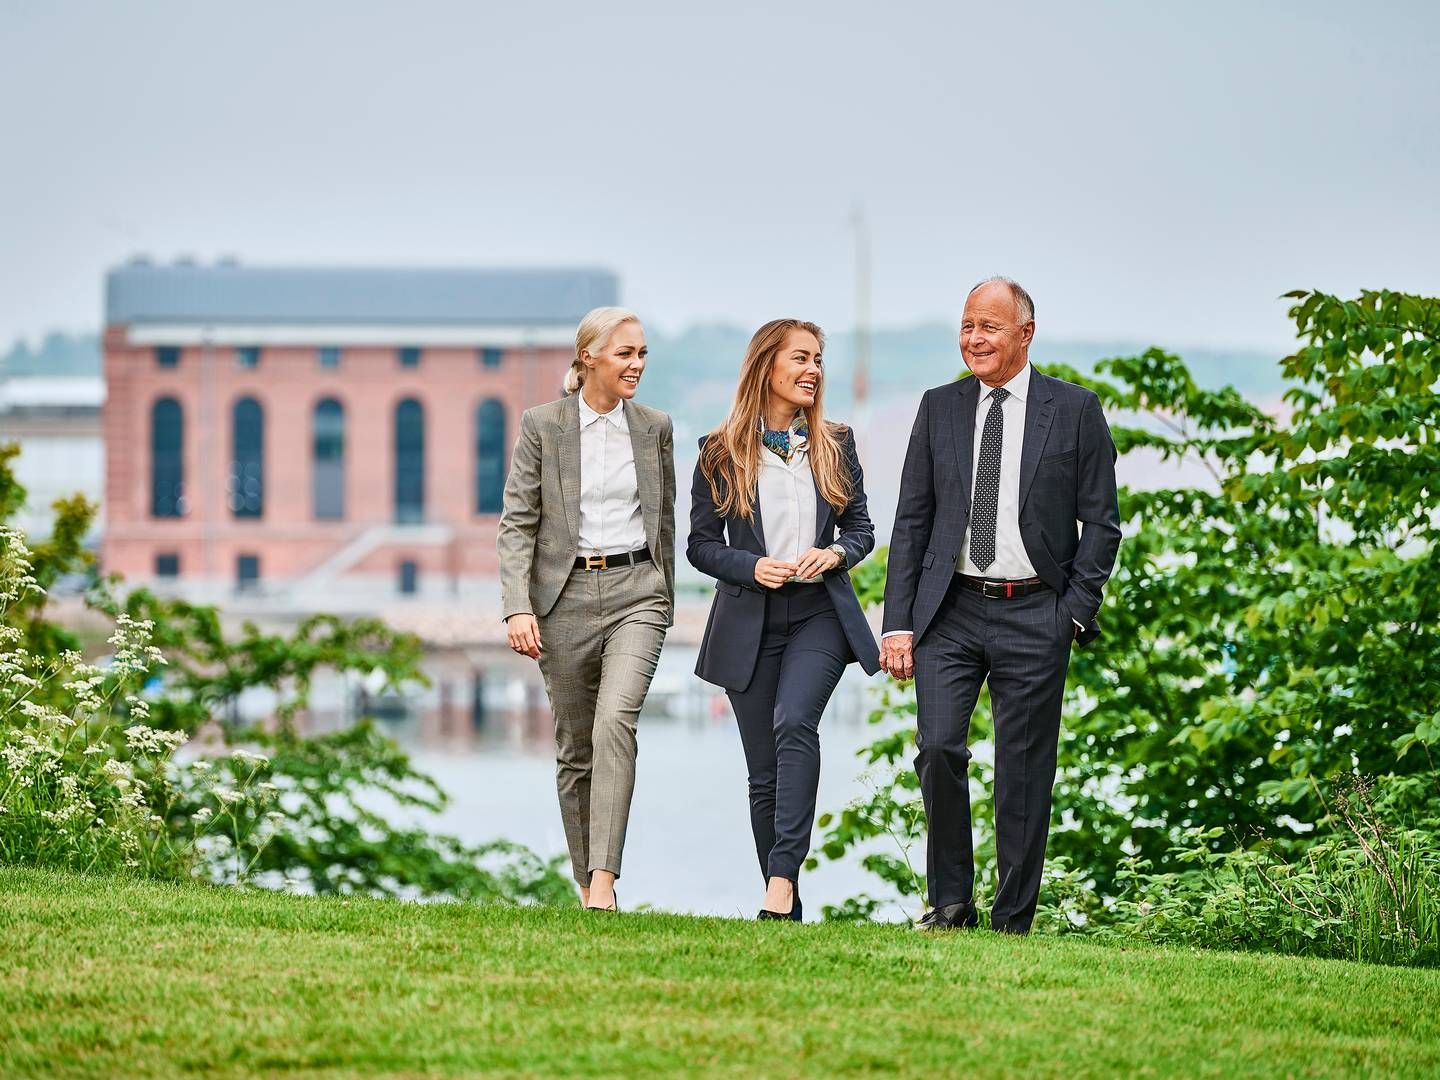 Torben Østergaard-Nielsen and his two daughters, Nina Østergaard Borris and Mia Østergaard Rechnitzer, are now focusing even more on energy trading. | Foto: Pr / Ustc